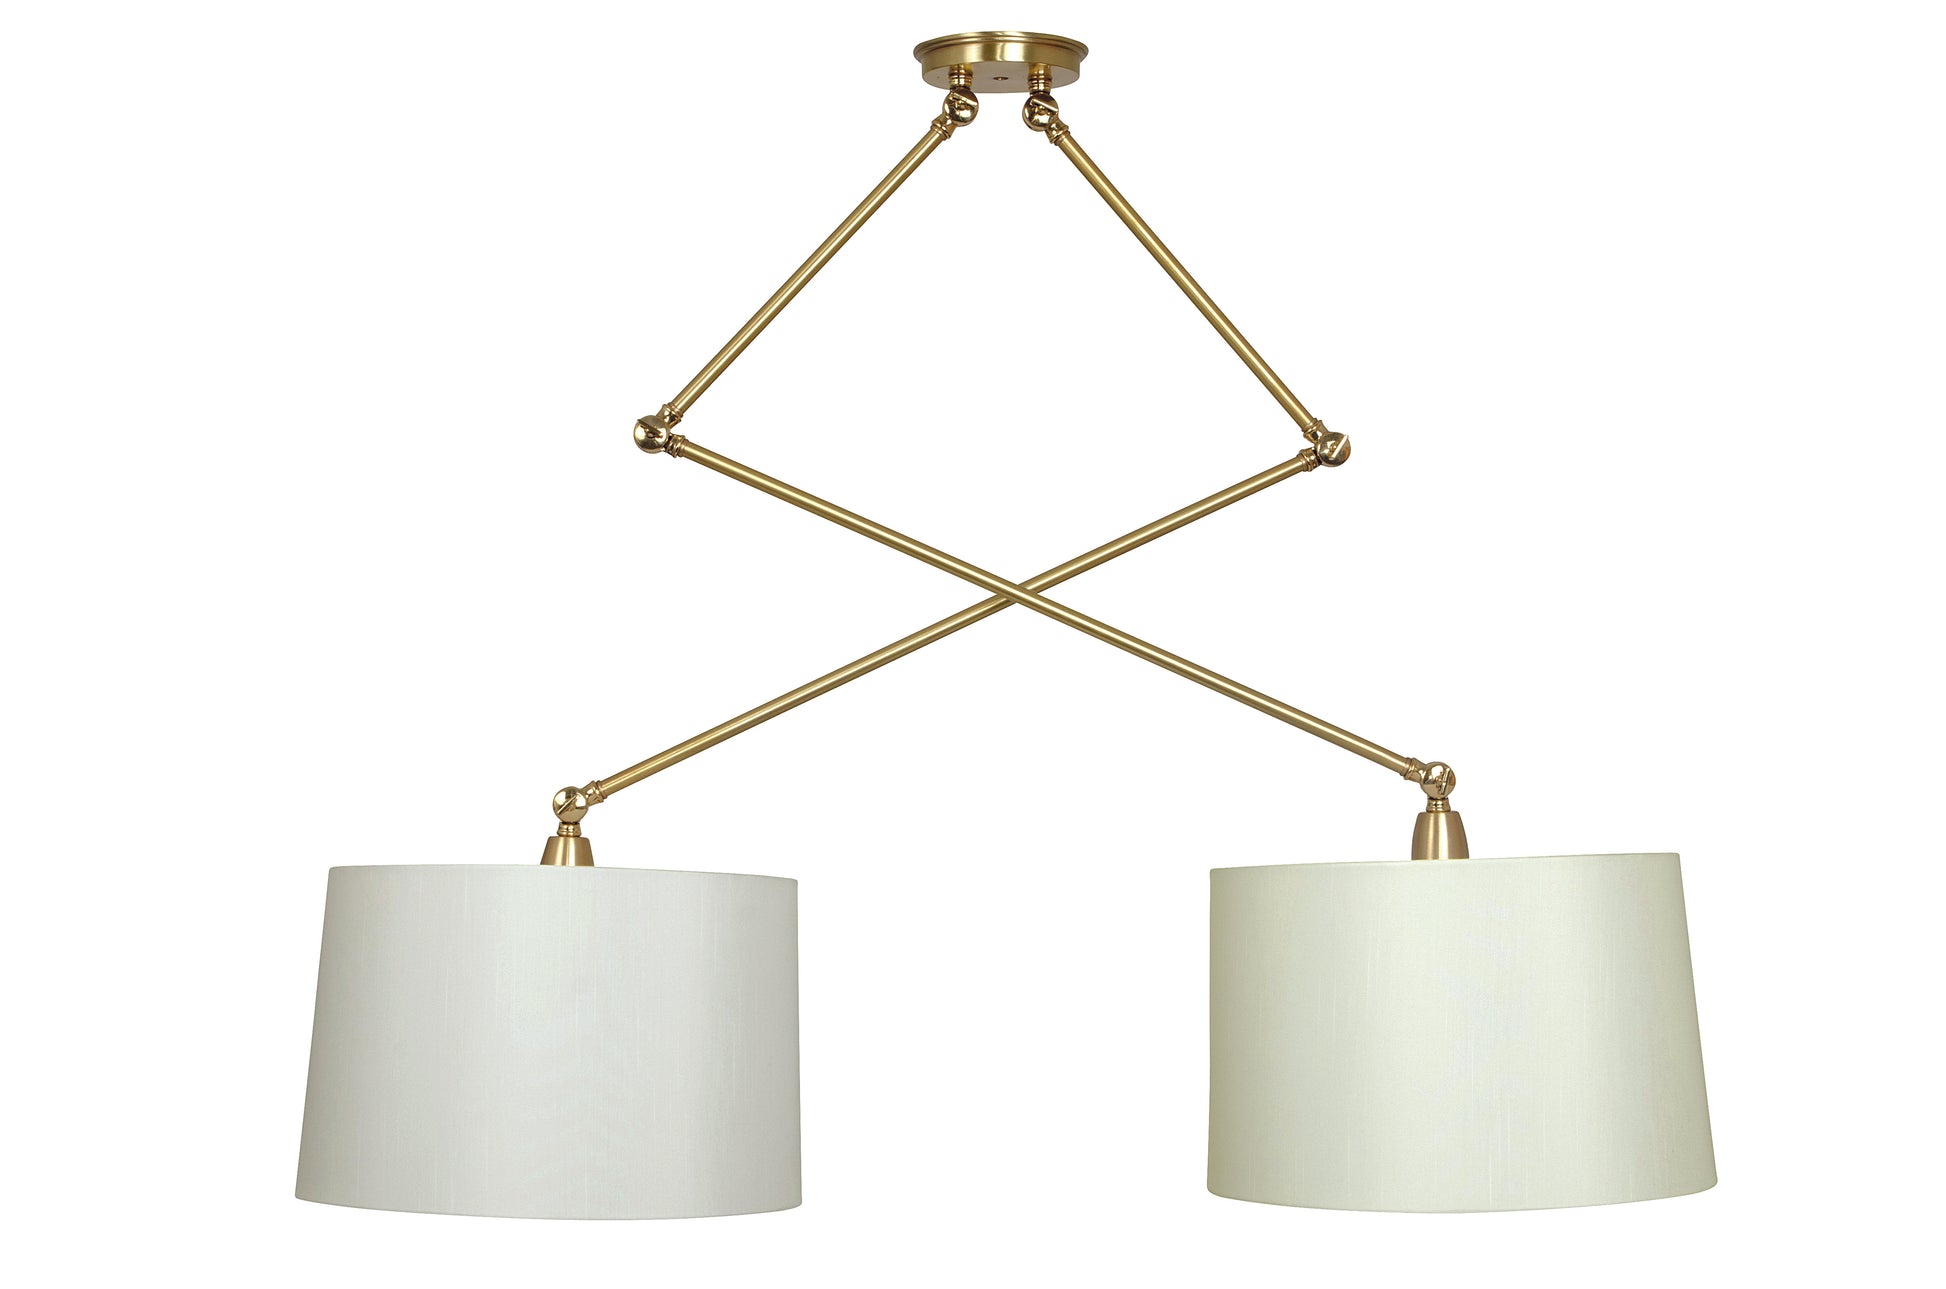 House of Troy Uptown double adjustable pendant satin brass/polished brass accents UP502-SB/PB